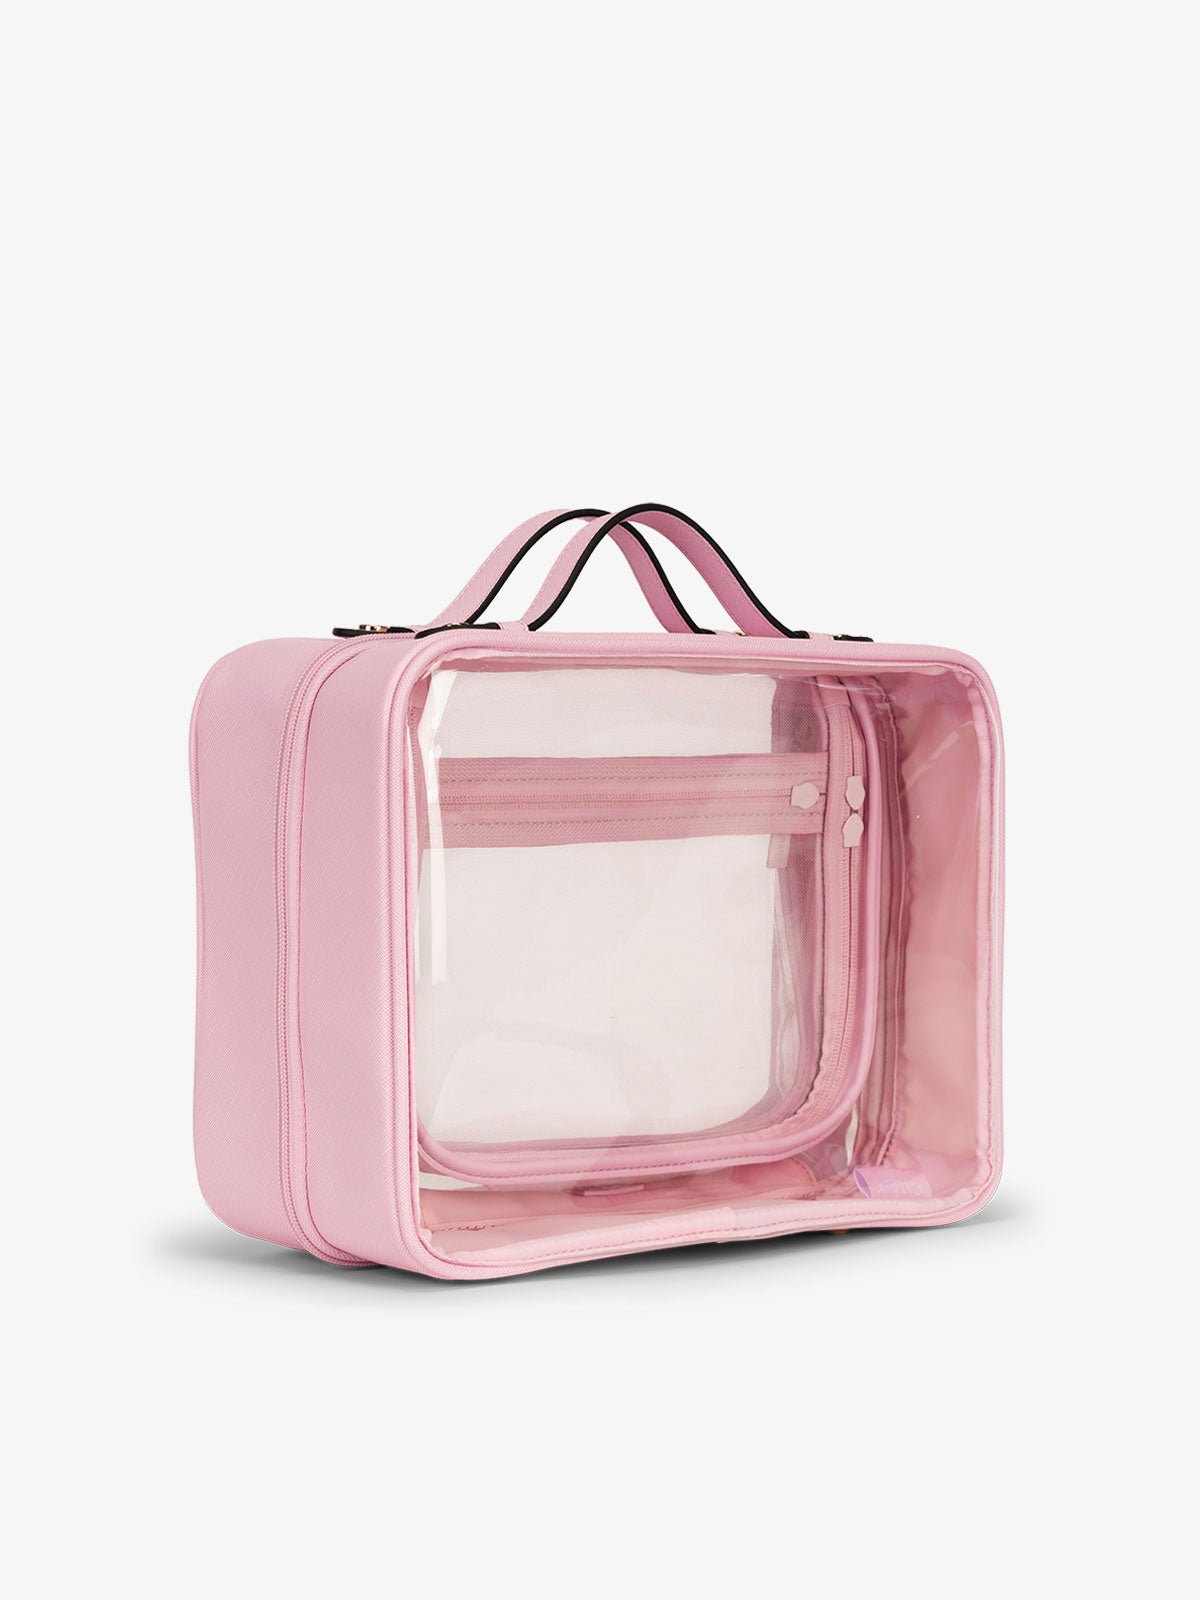 CALPAK large clear skincare bag with multiple zippered compartments in strawberry pink